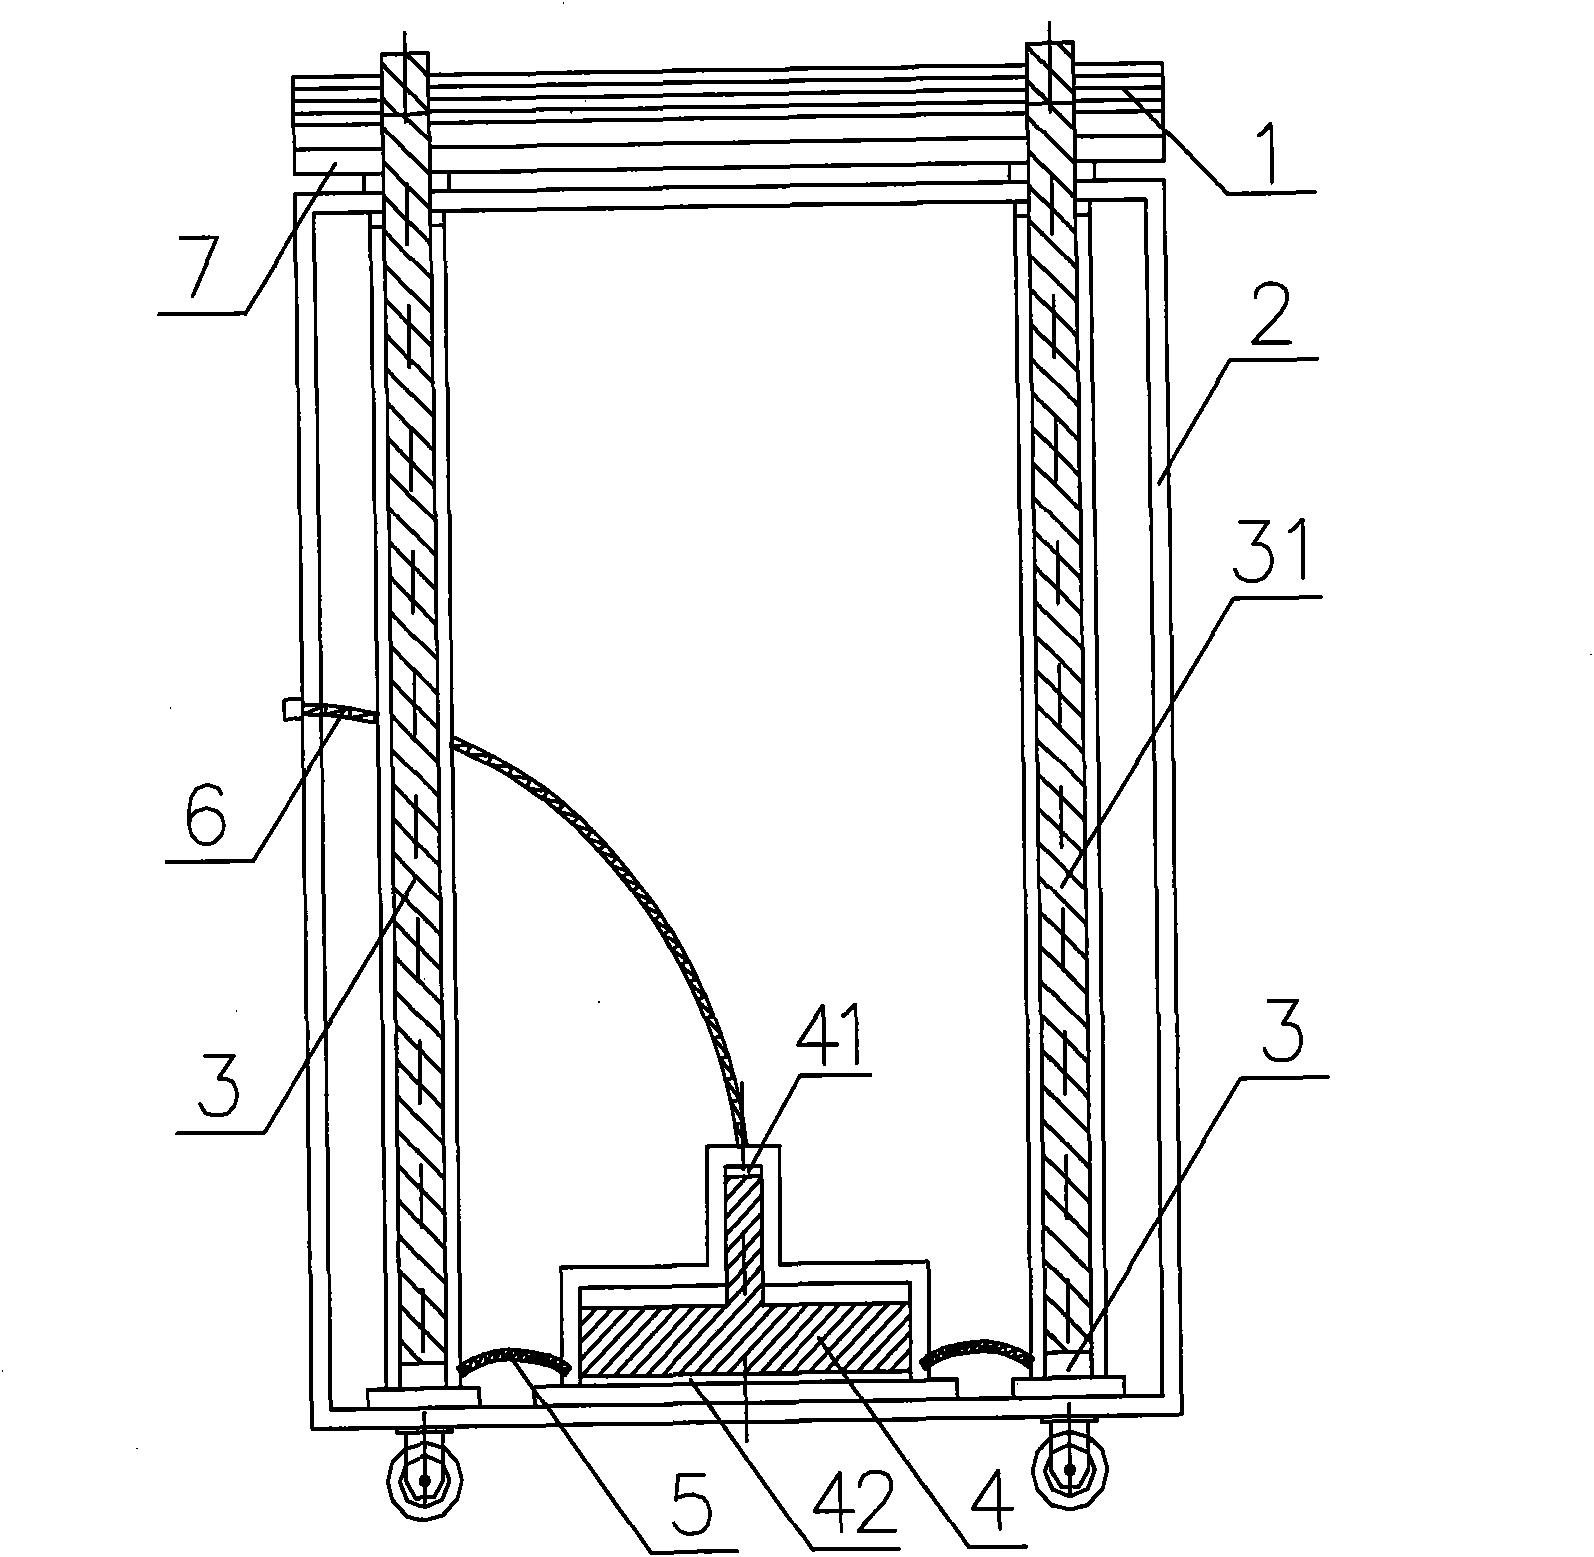 Pressure stabilizing device for hydraulic loading